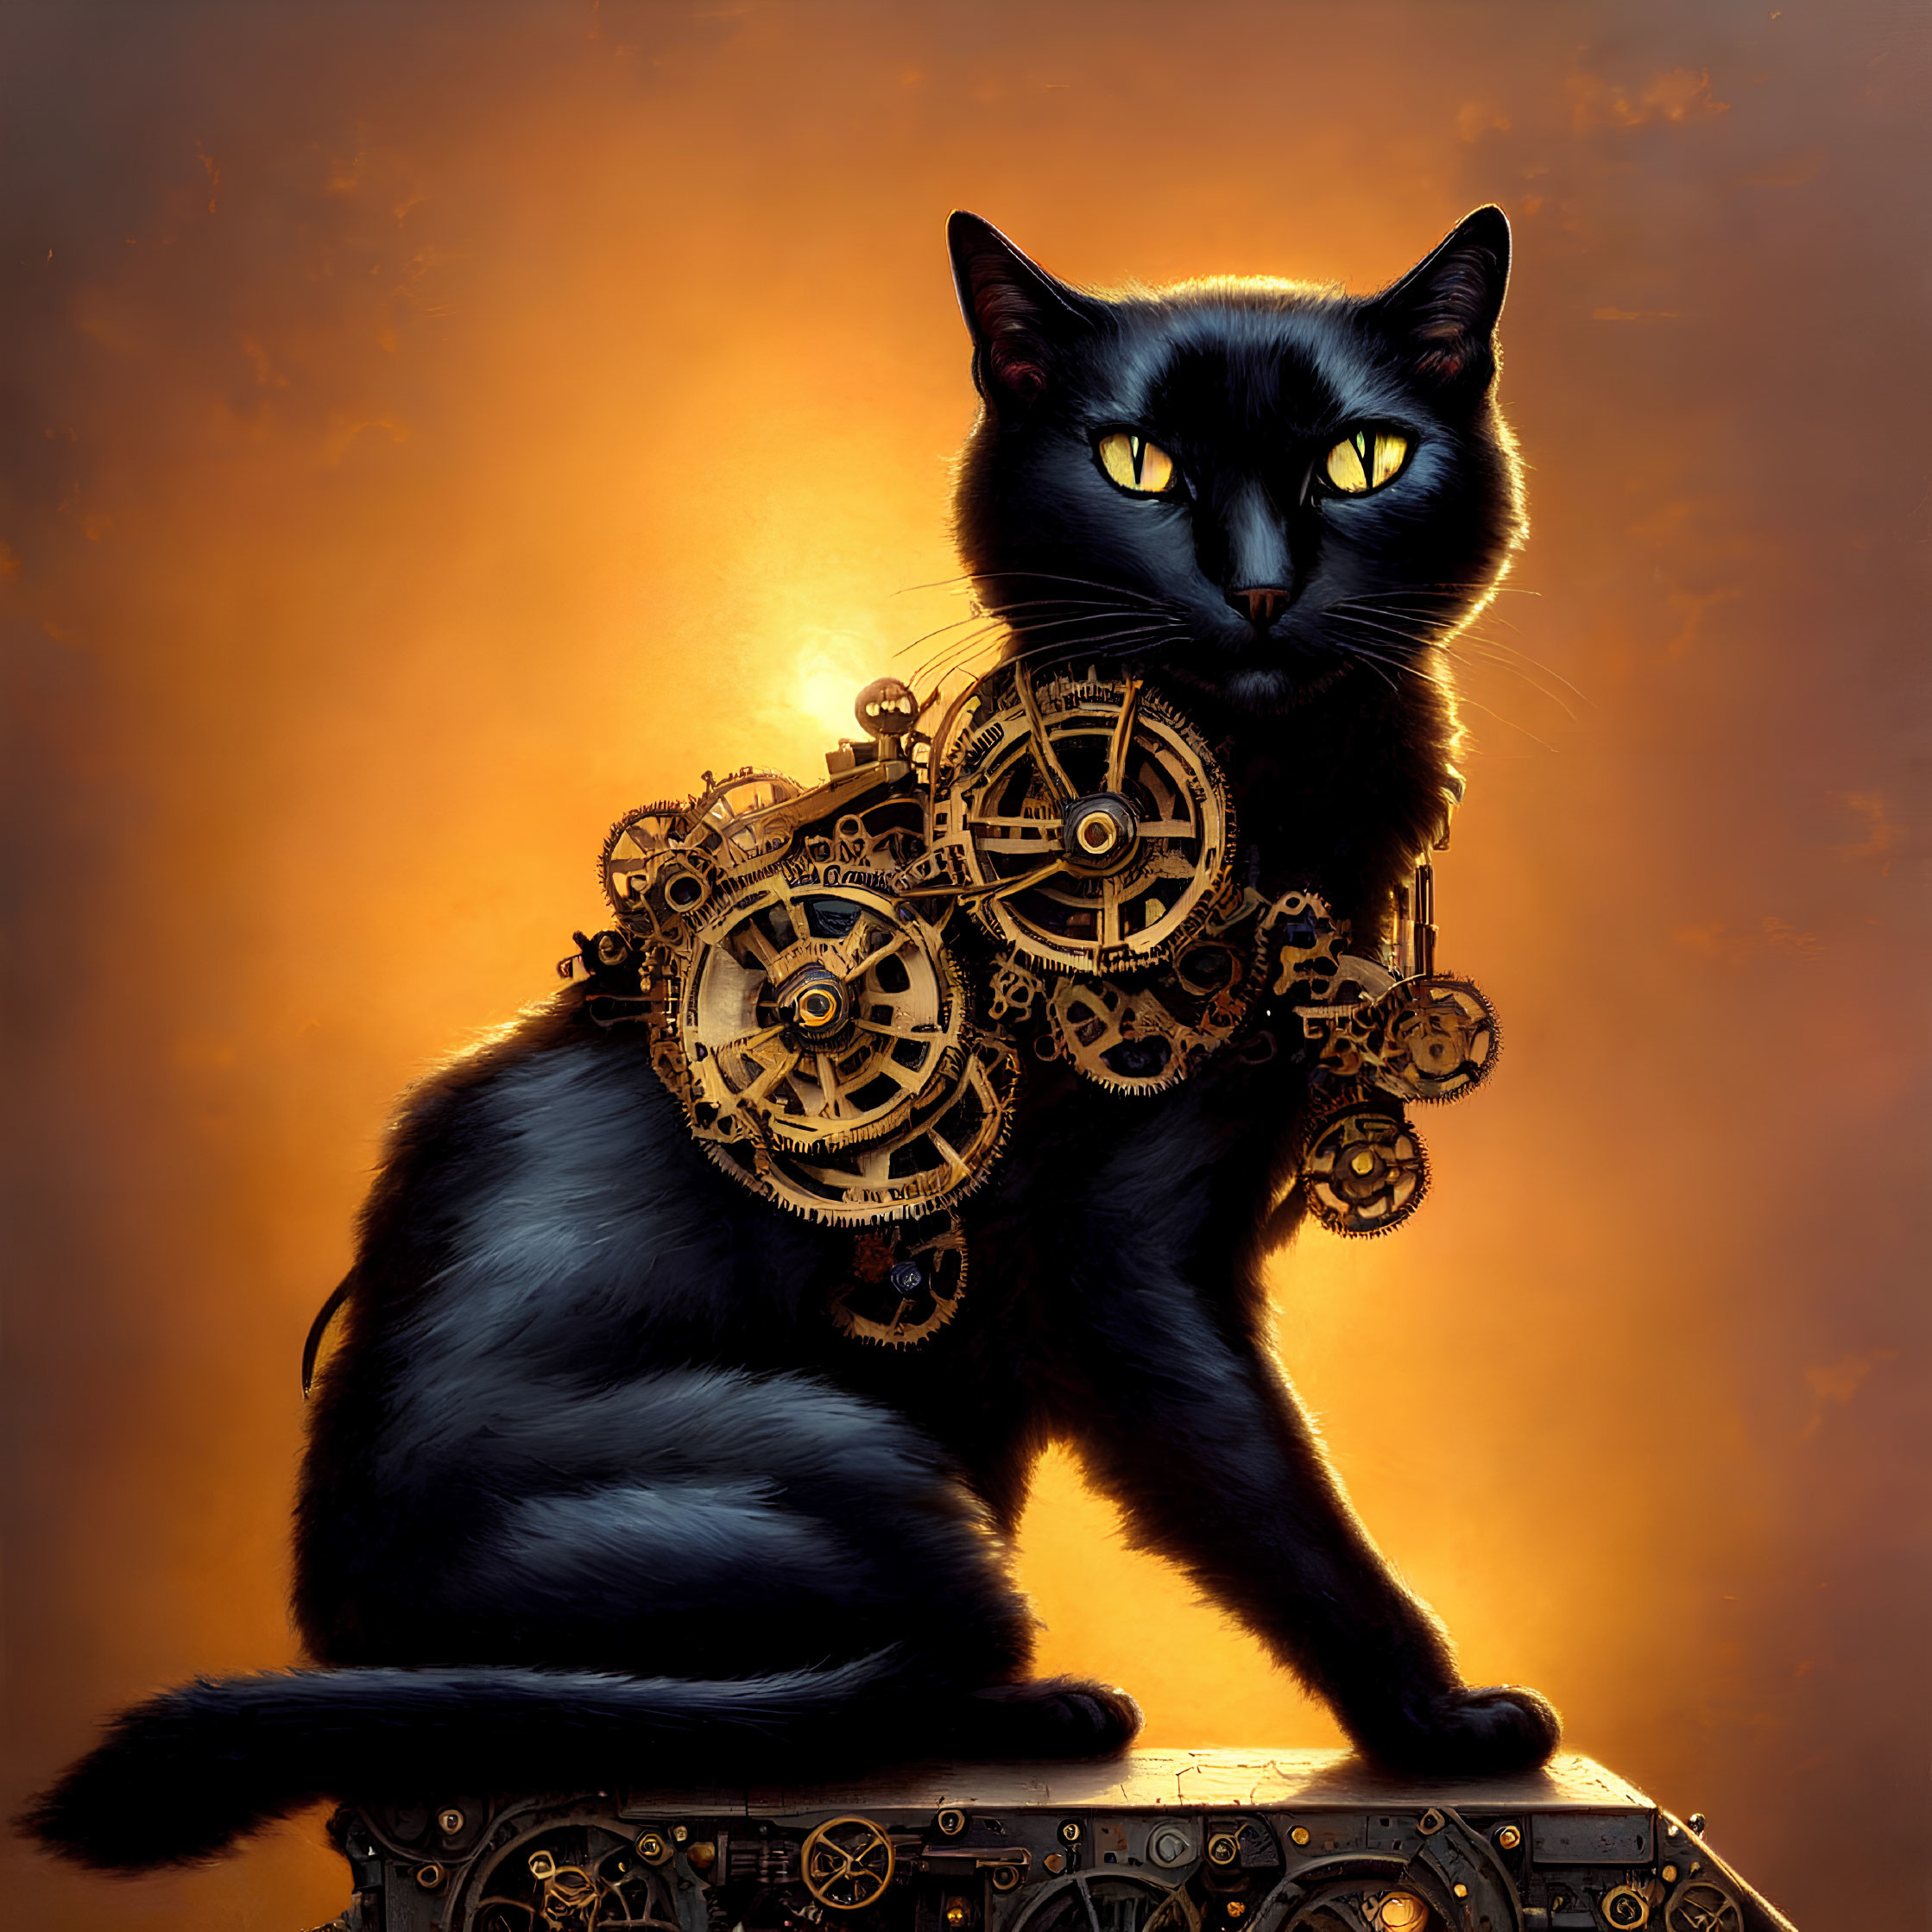 Black Cat with Steampunk Gears and Yellow Eyes on Orange Background